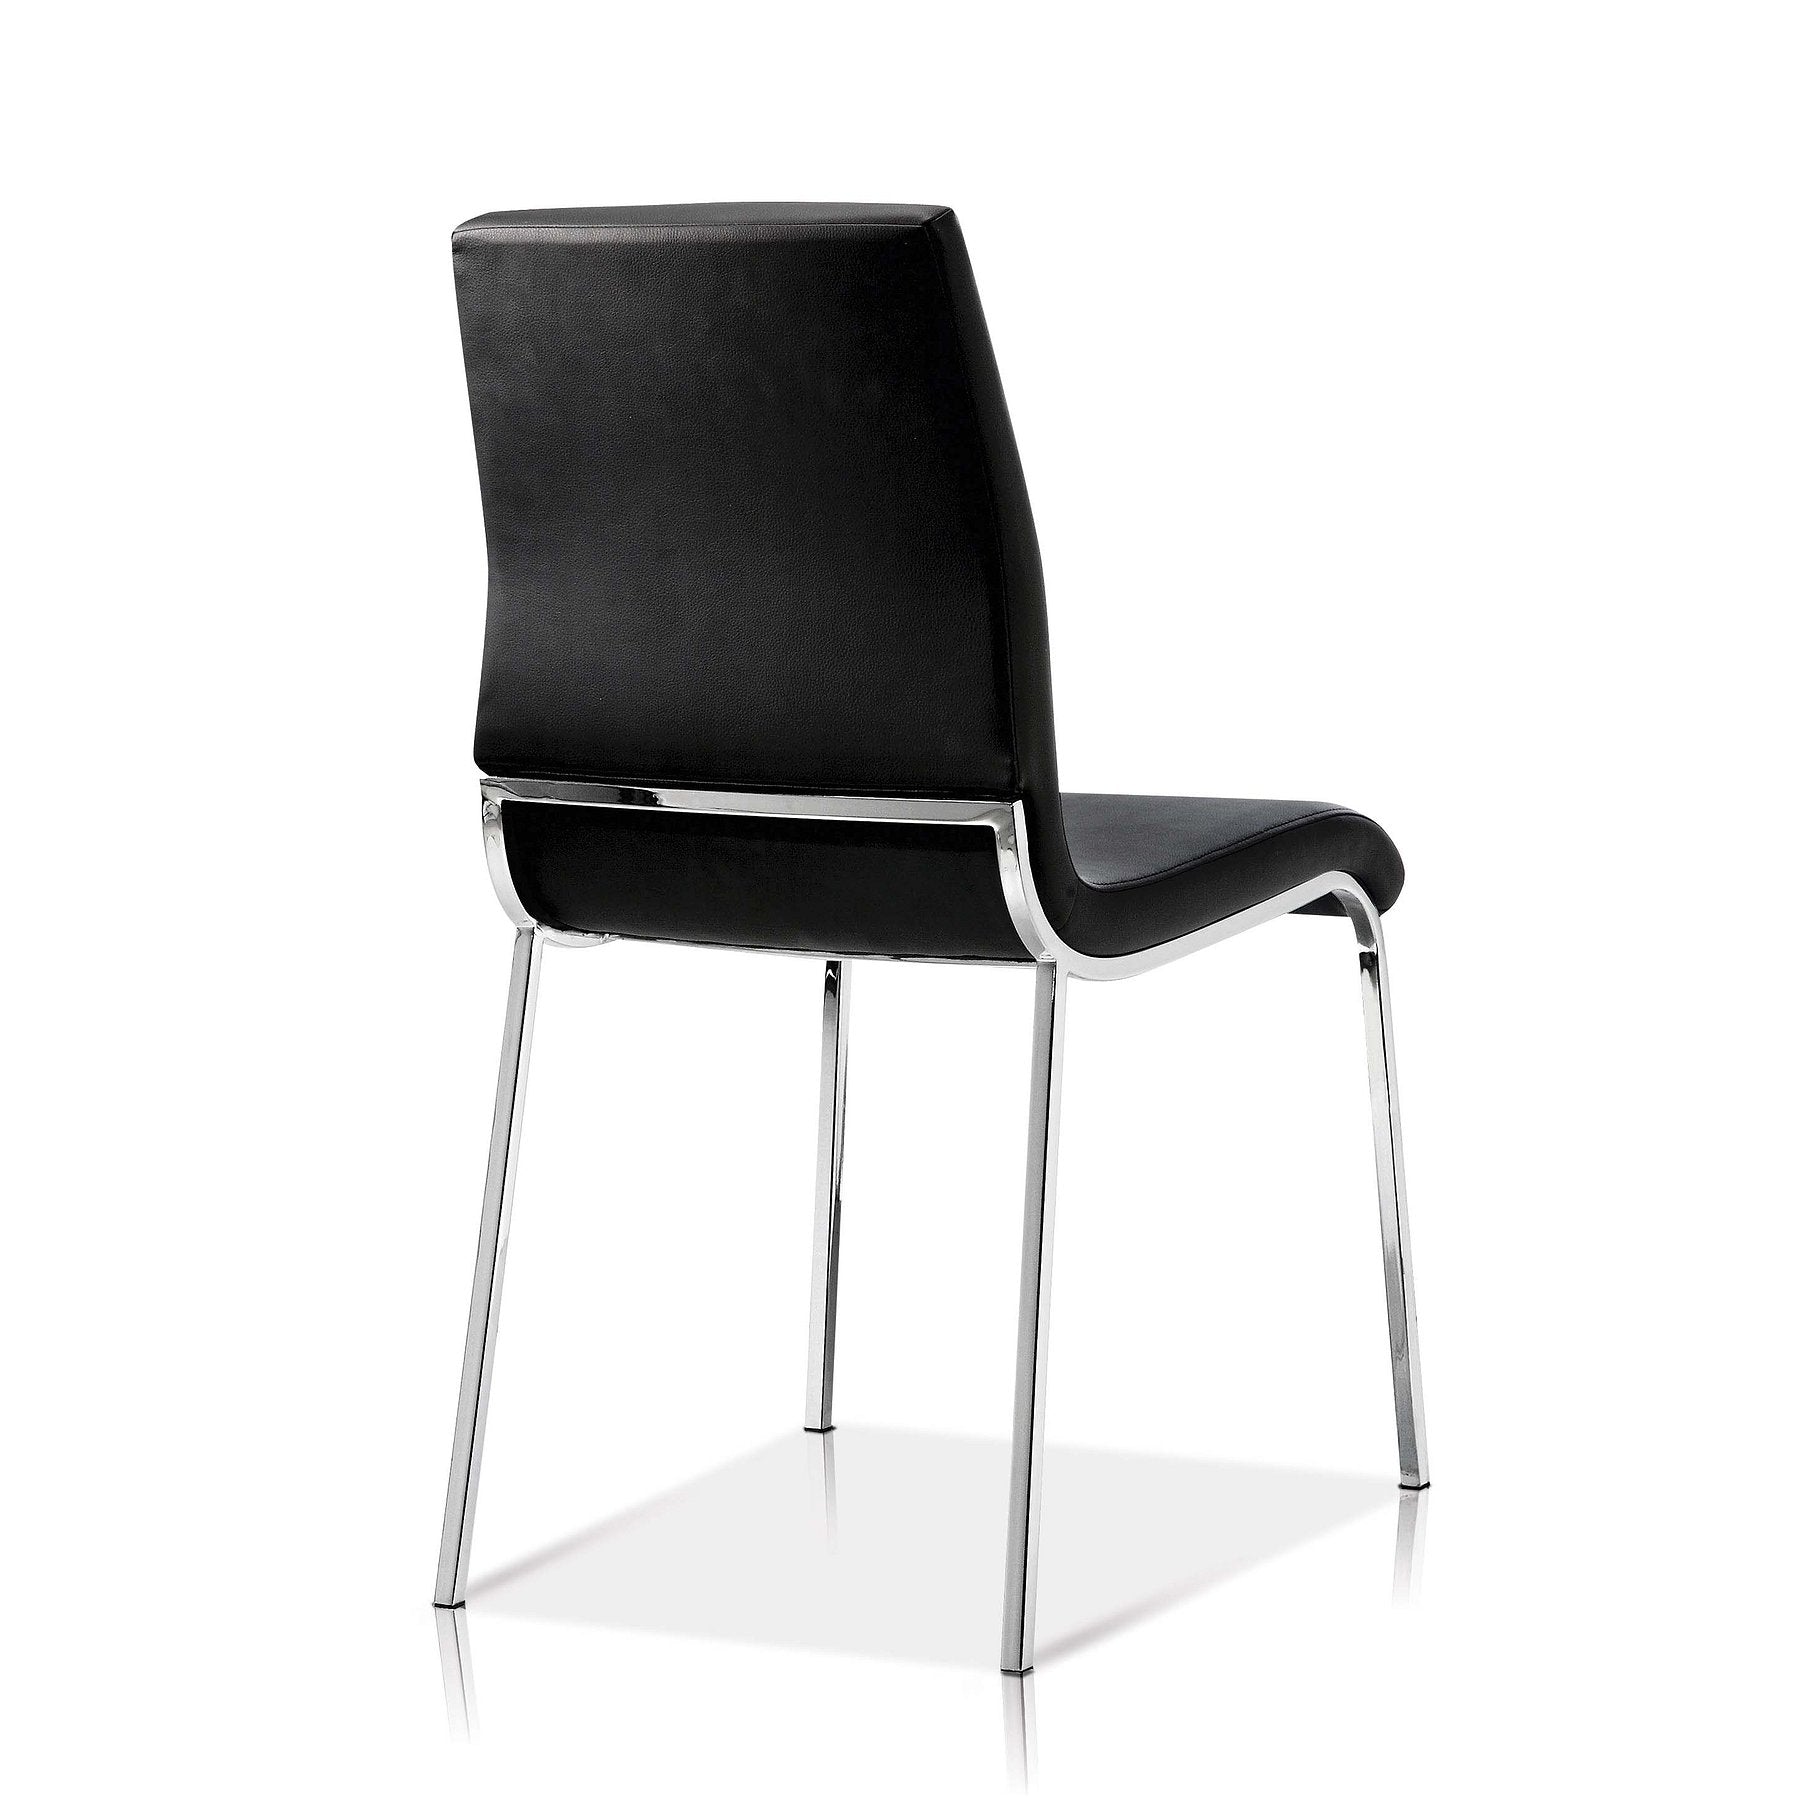 SEF314174 max - dining chair - Dreamart Gallery